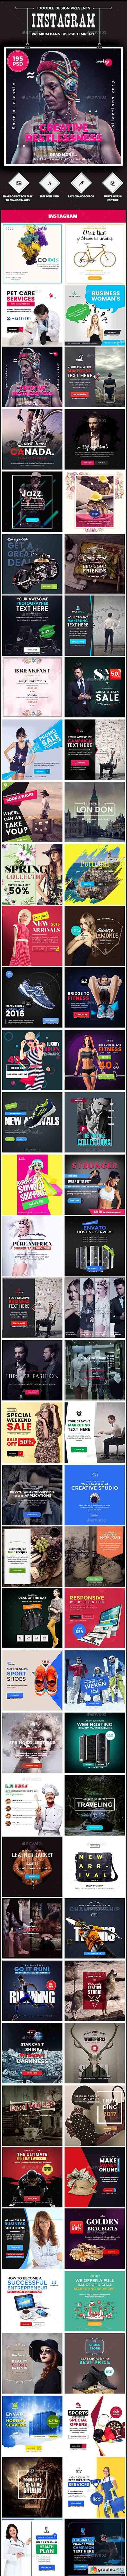 Promotion Instagram Banners Ads - 195 PSD